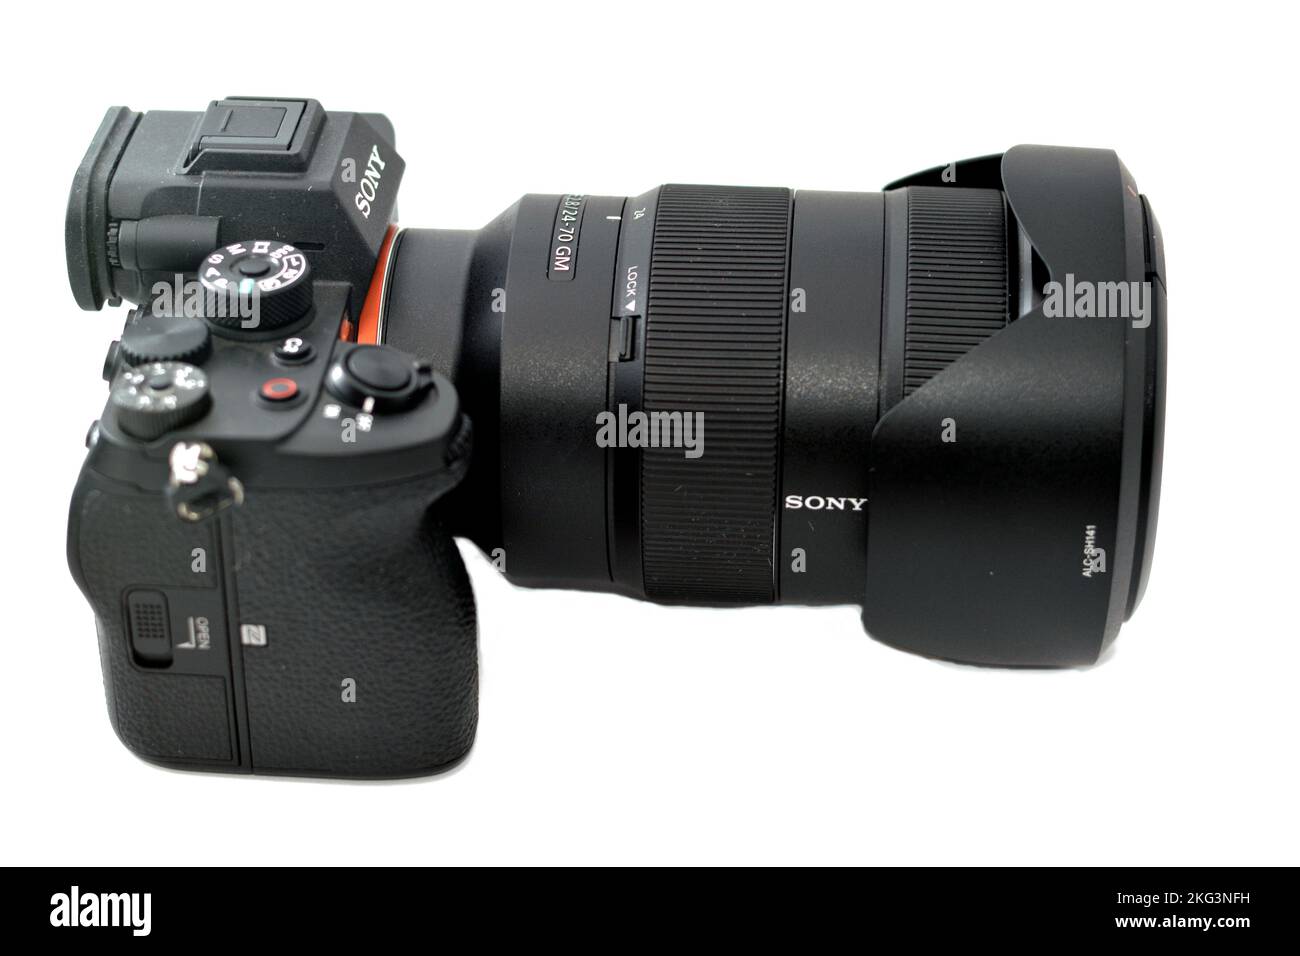 Cairo, Egypt, October 20 2022: Sony Alpha A7s iii mirrorless professional full frame digital camera body with Sony FE 24-70mm zoom F2.8 GM lens with a Stock Photo